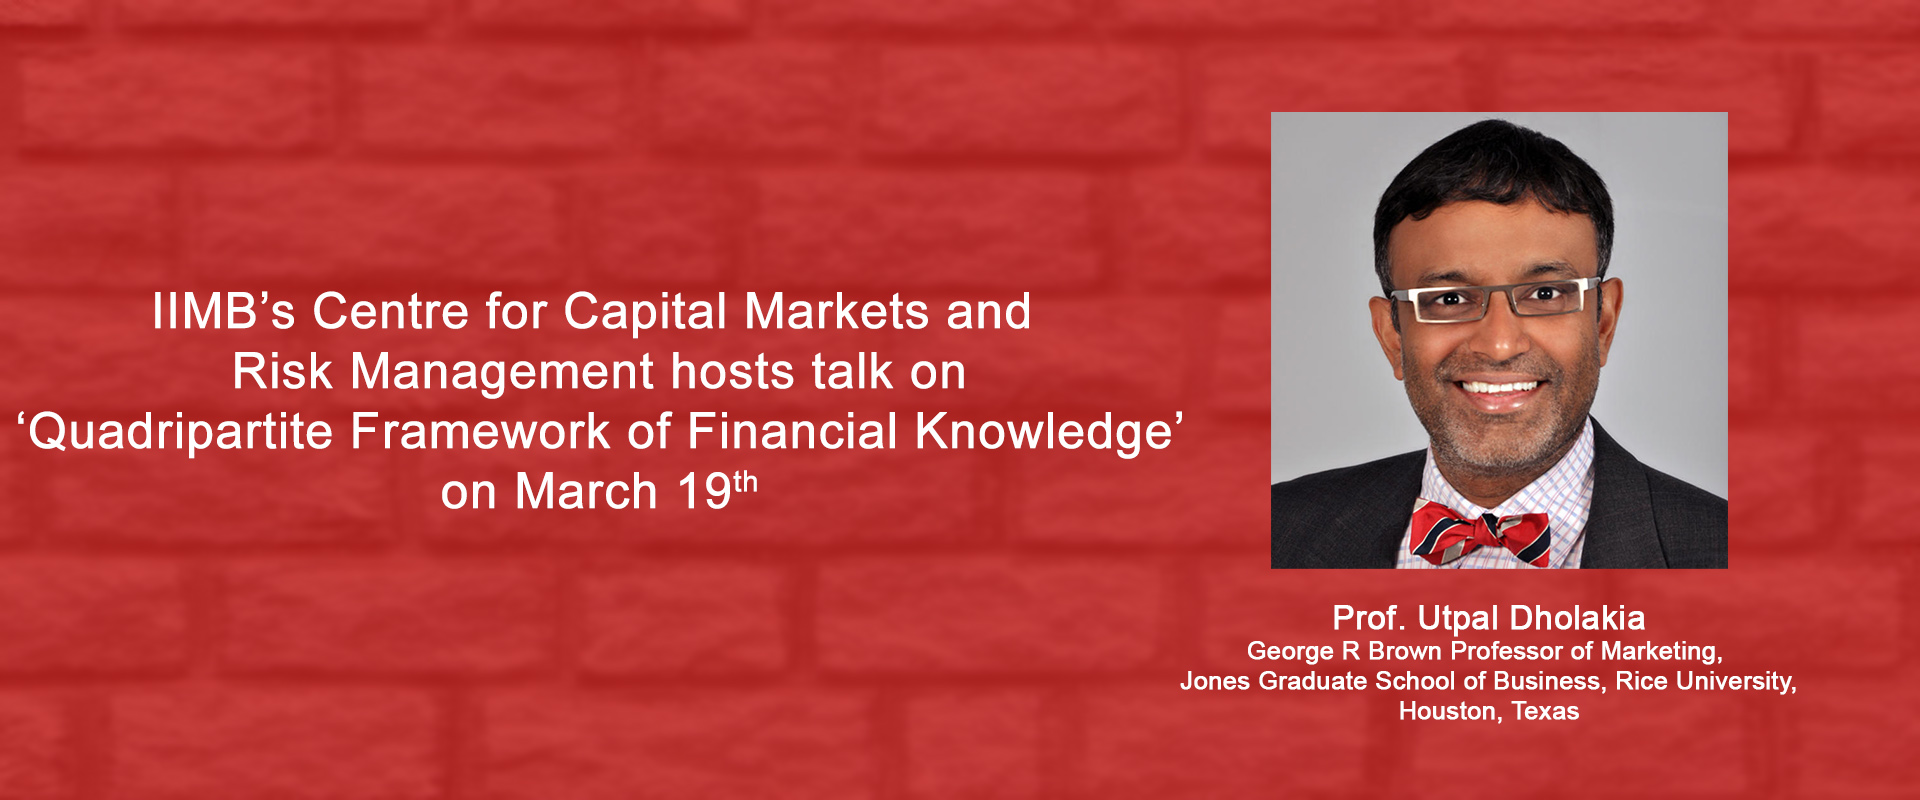 IIMB’s Centre for Capital Markets and Risk Management hosts talk on ‘Quadripartite Framework of Financial Knowledge’ on March 19